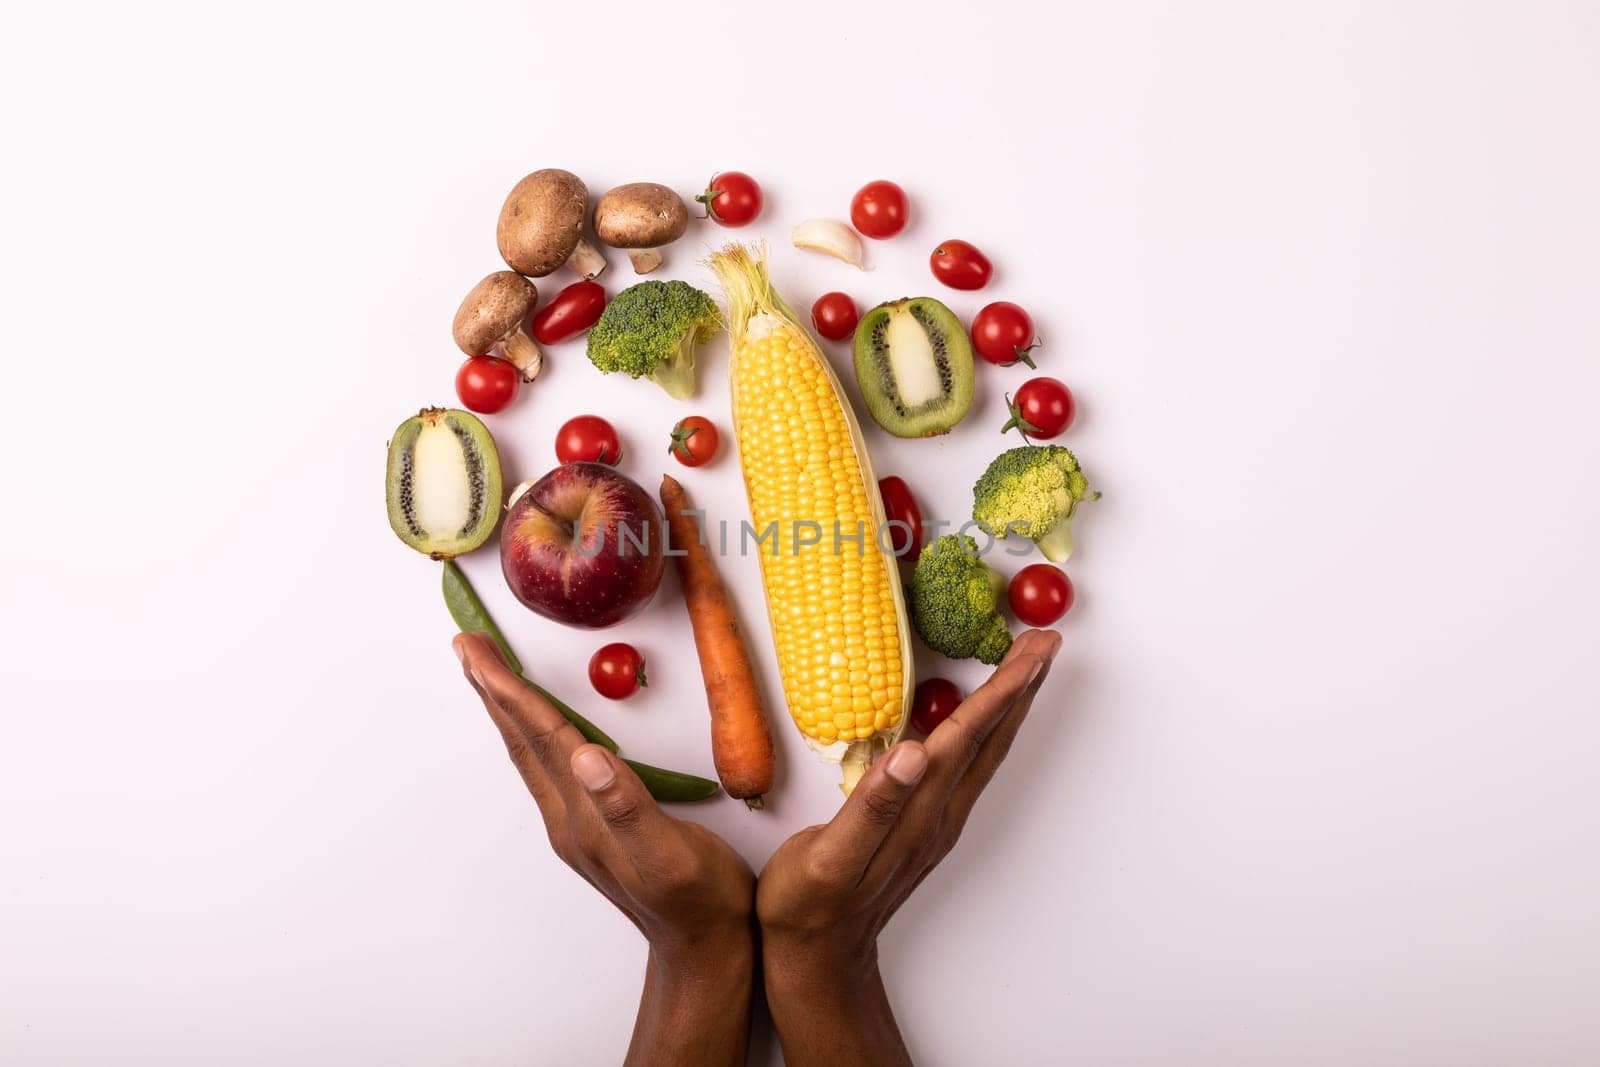 Cropped hands by vegetables and fruits arranged in circle by copy space on white background. unaltered, food, healthy eating, organic concept.